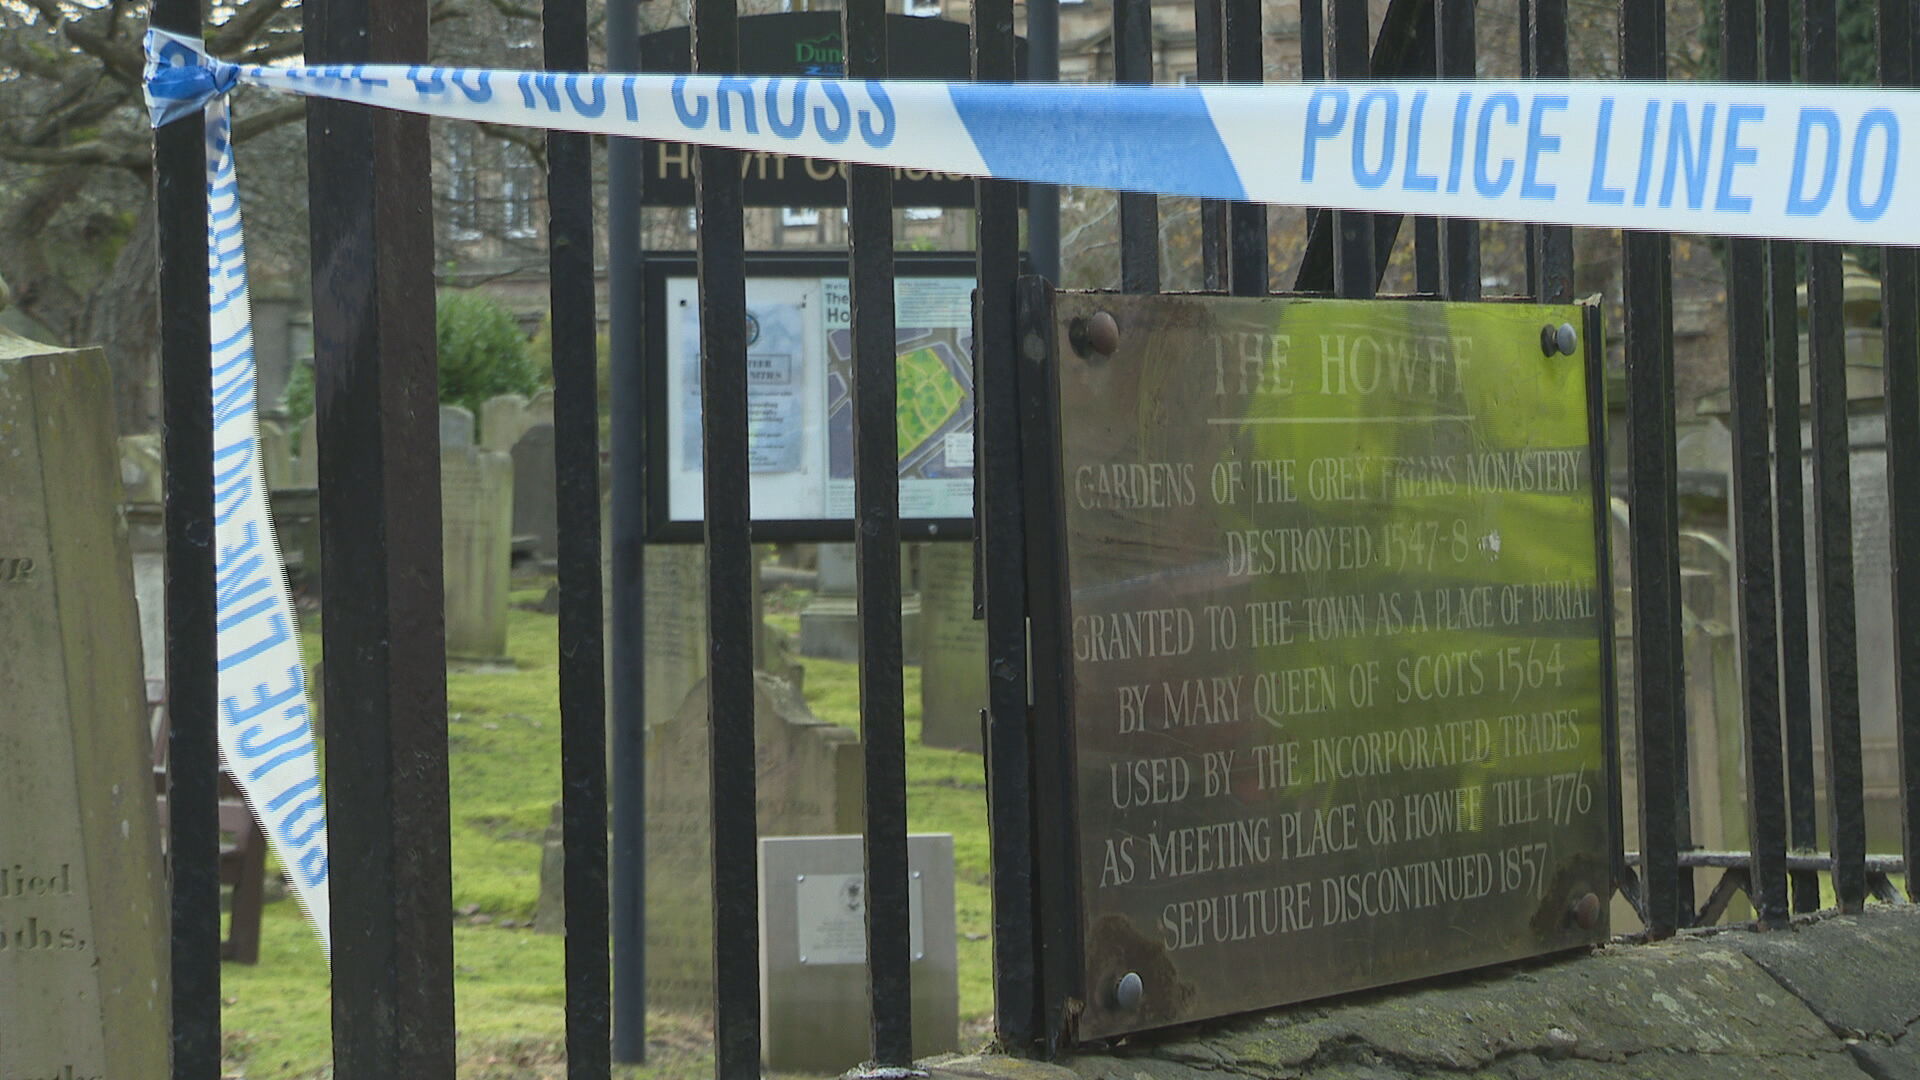 Police Scotland cordon off The Howff in Dundee after a person's body is found.